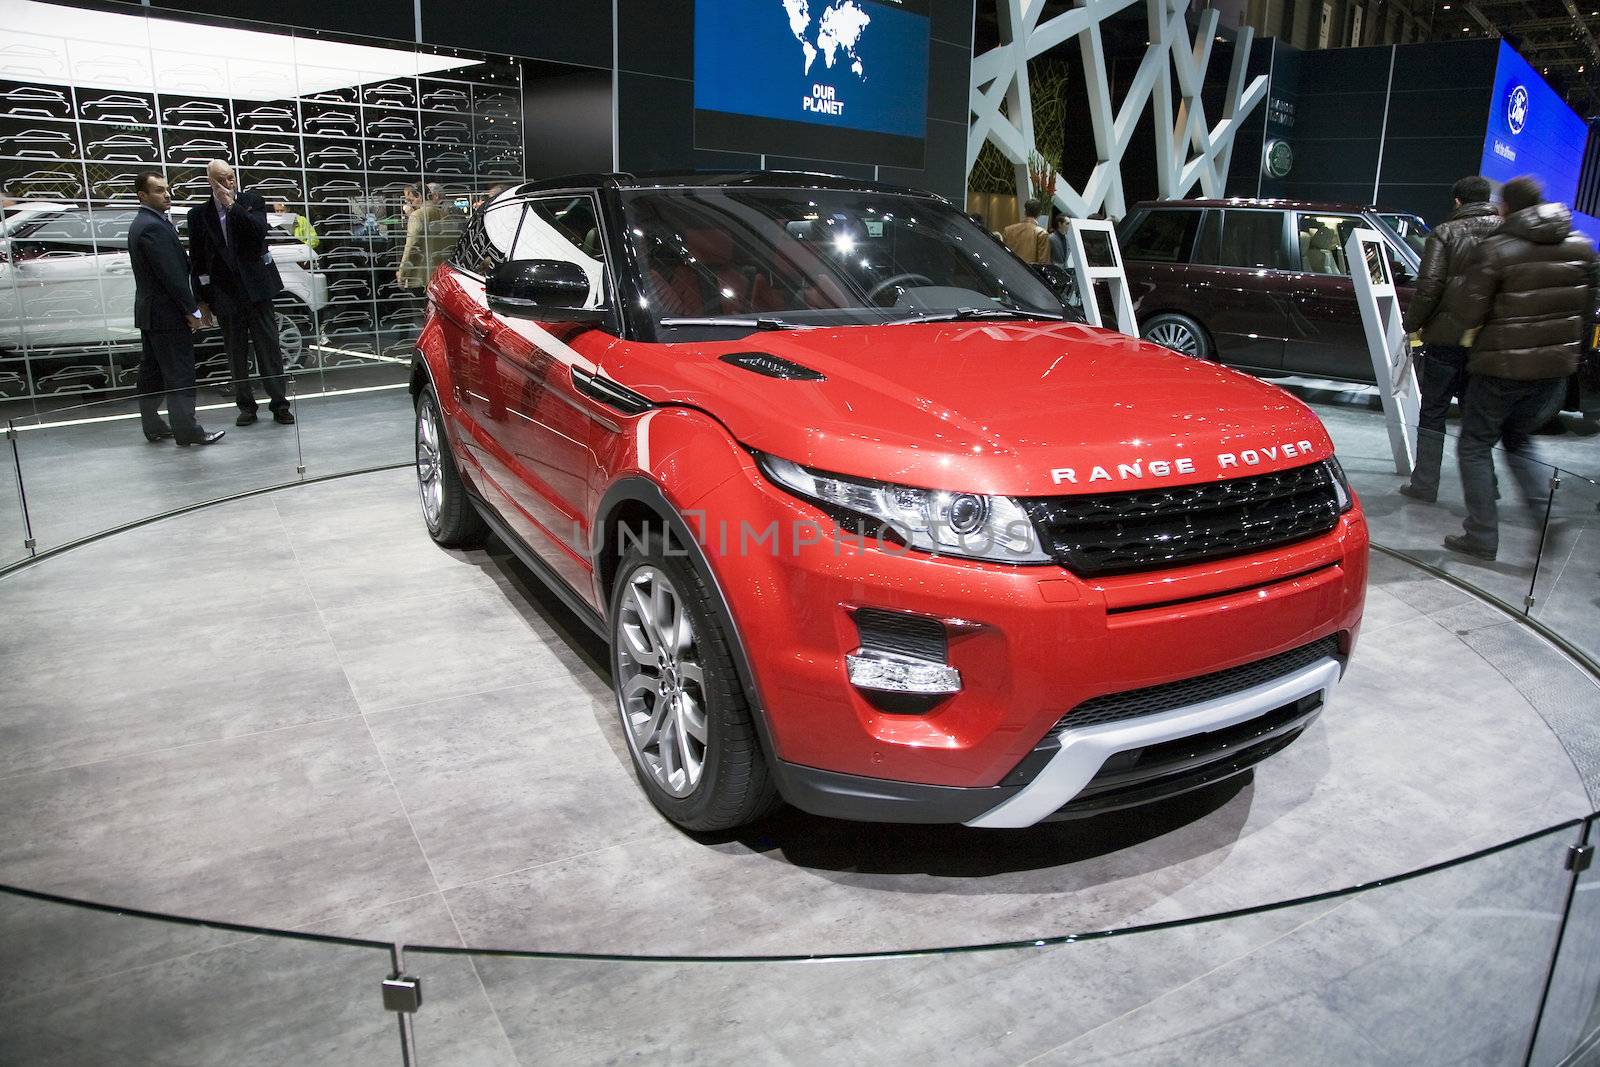 Range Rover Evoque Coupe by shadow69